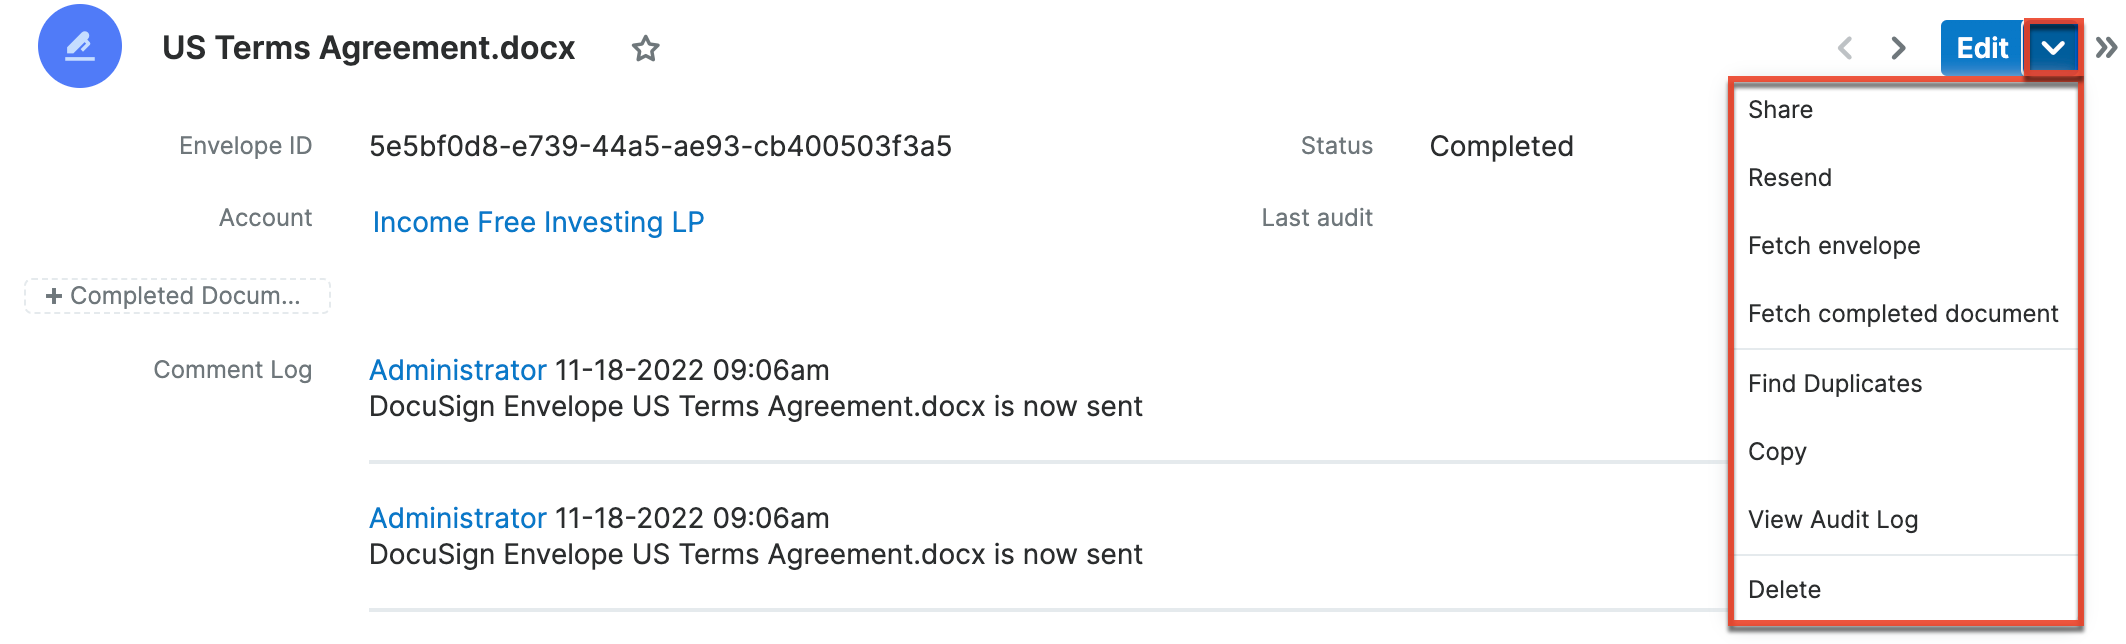 DocuSign record view actions menu